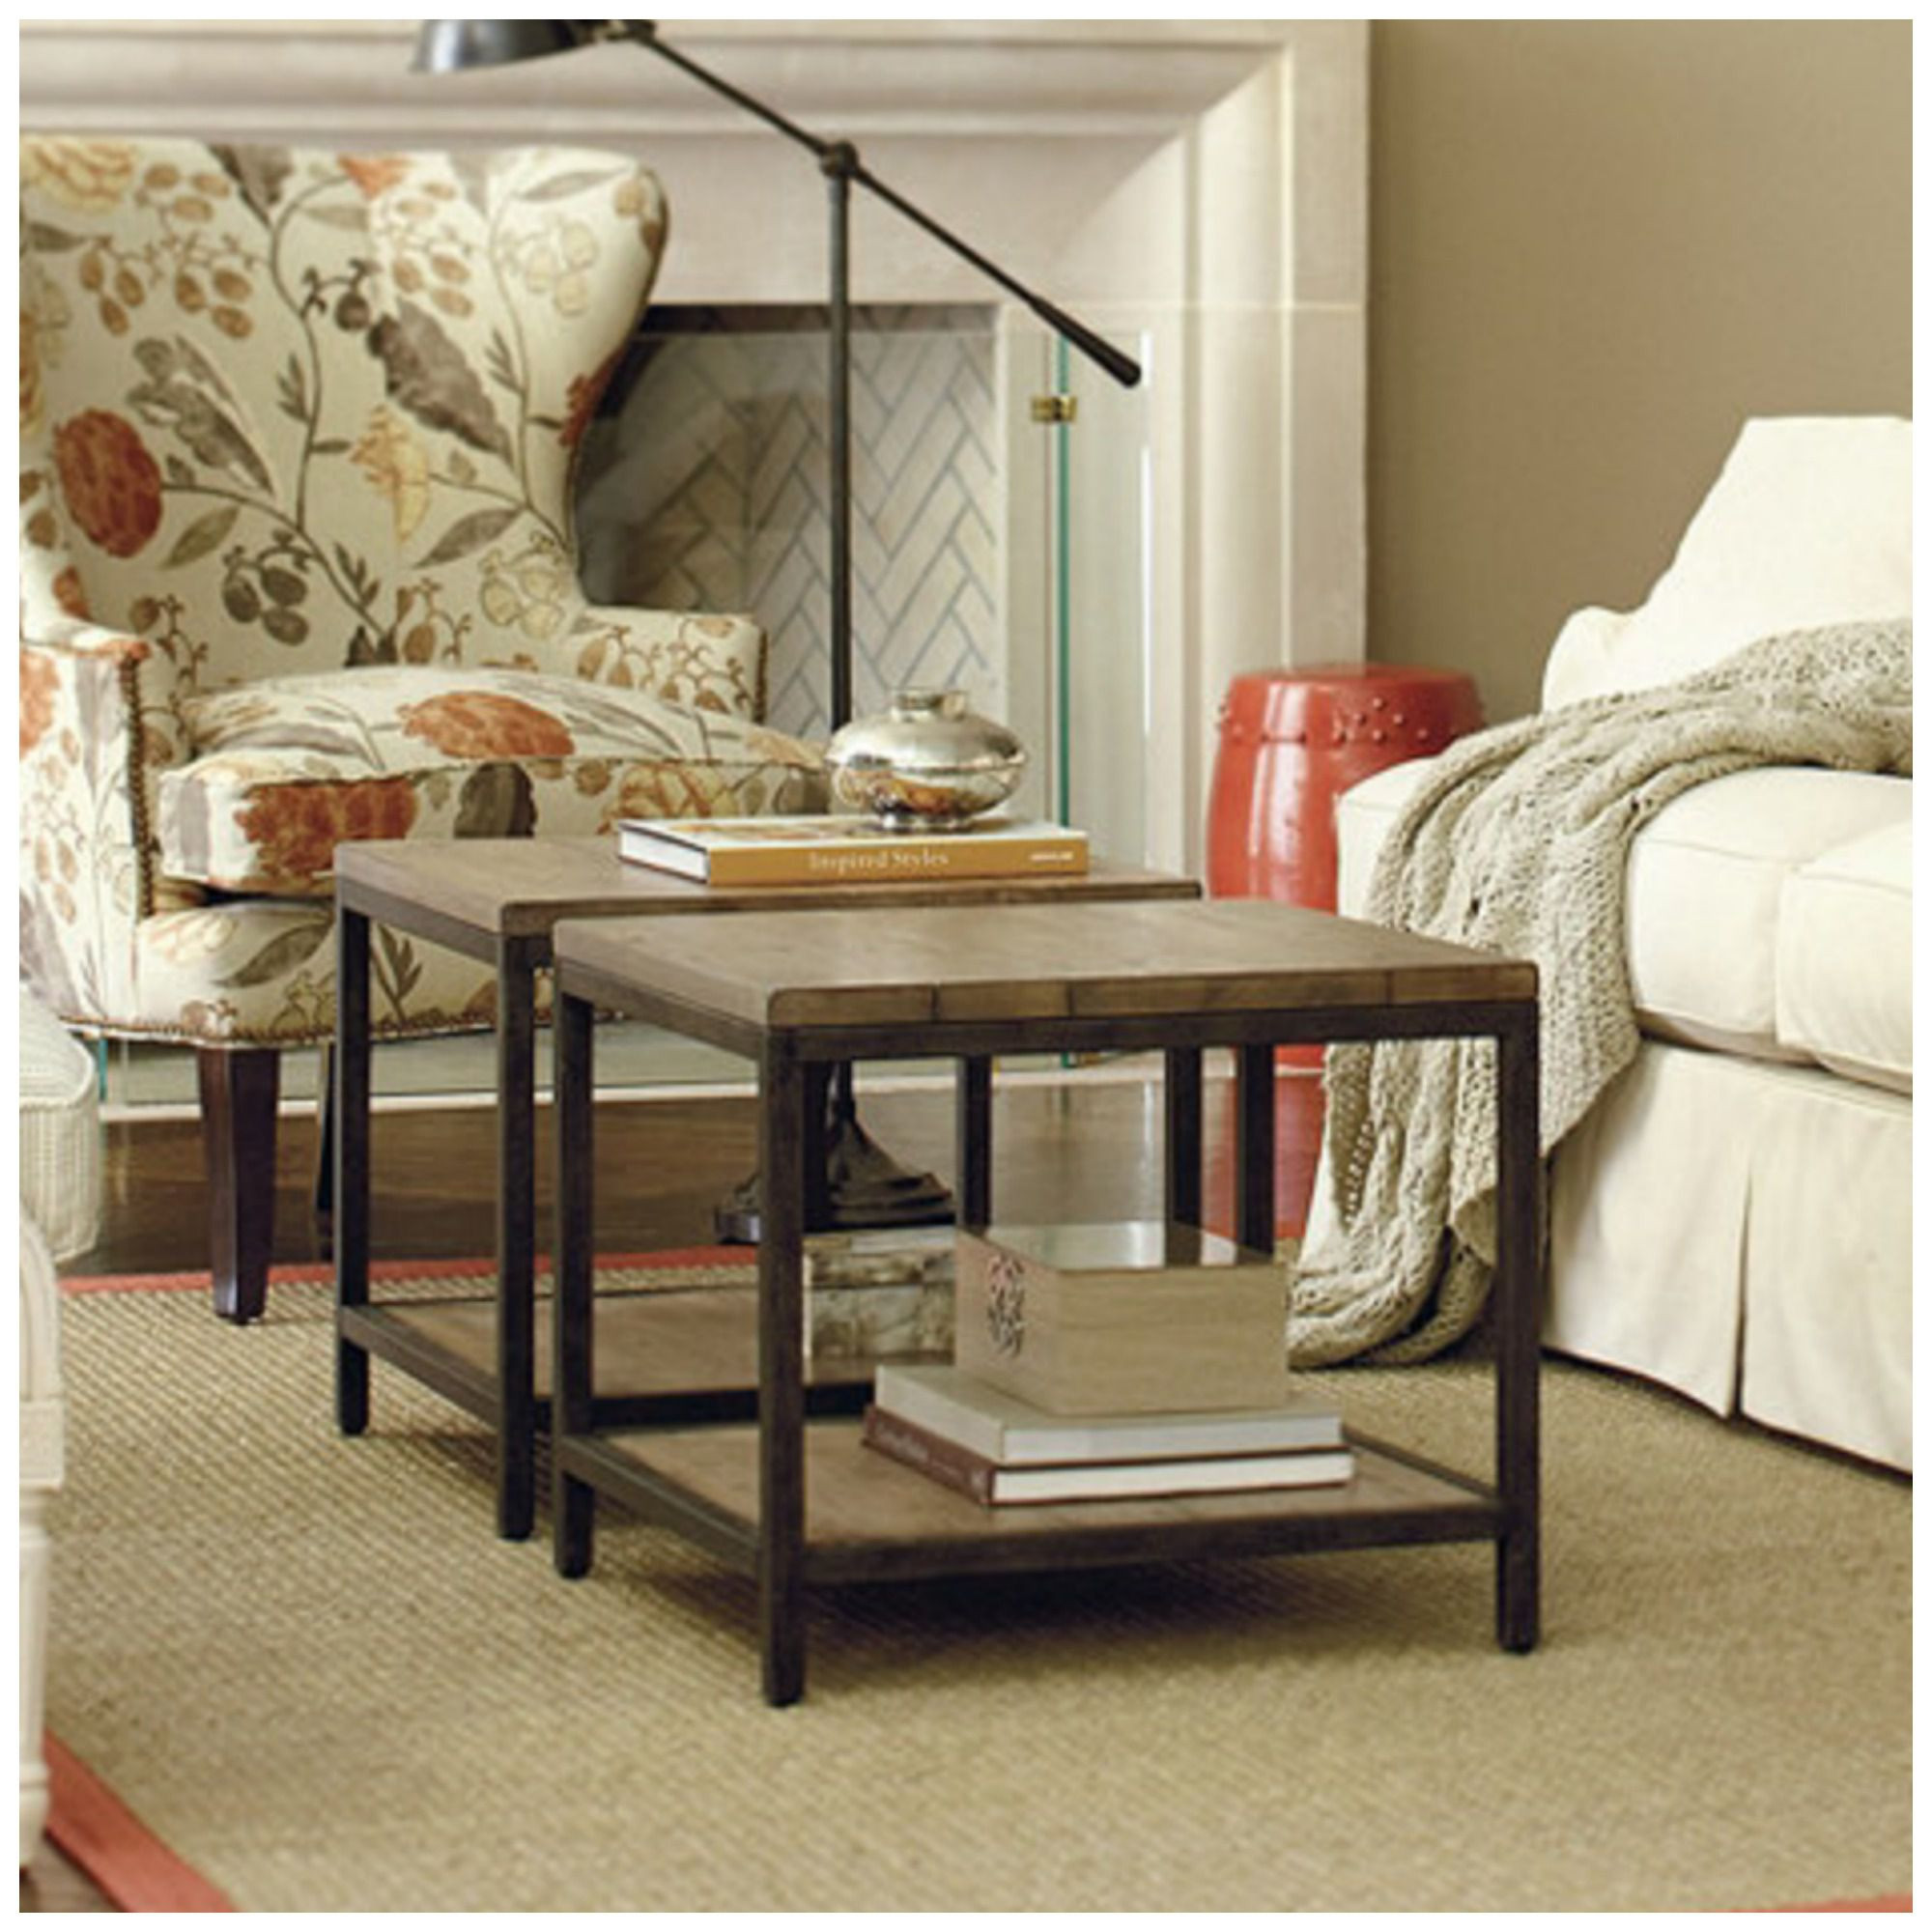 Living Spaces Coffee Table
 7 Coffee Table Alternatives for Small Living Rooms